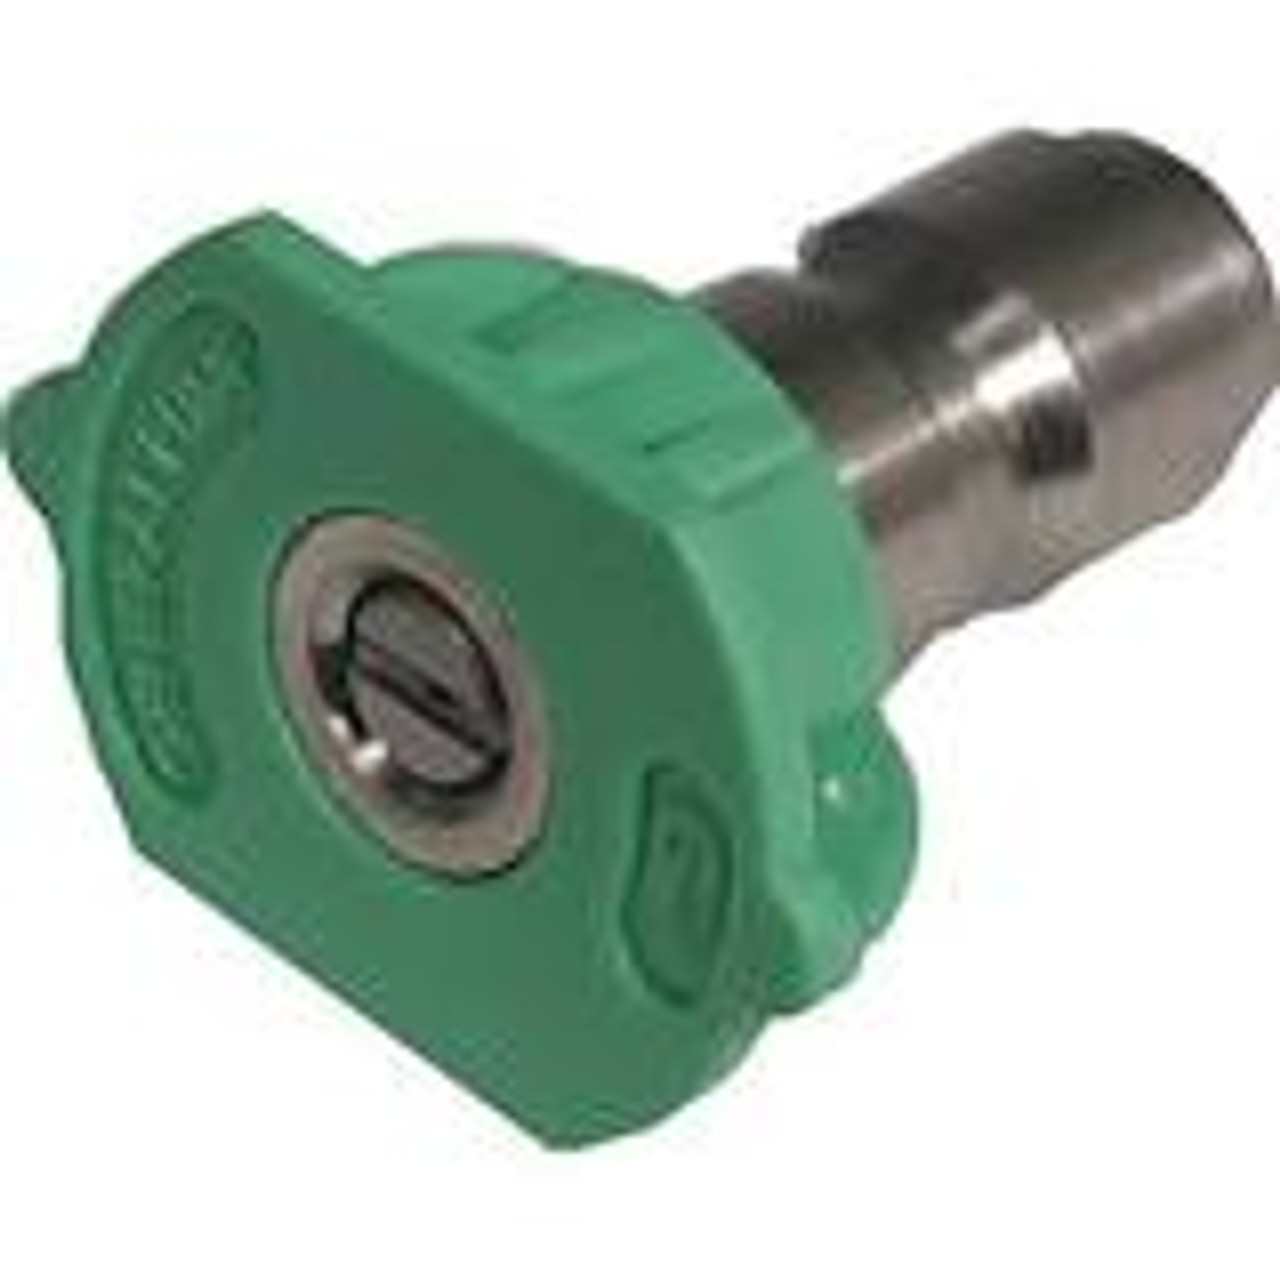 Stens 758-431 1/4" Quick Coupler Nozzle / 25 Degree, Size 3.5, Green